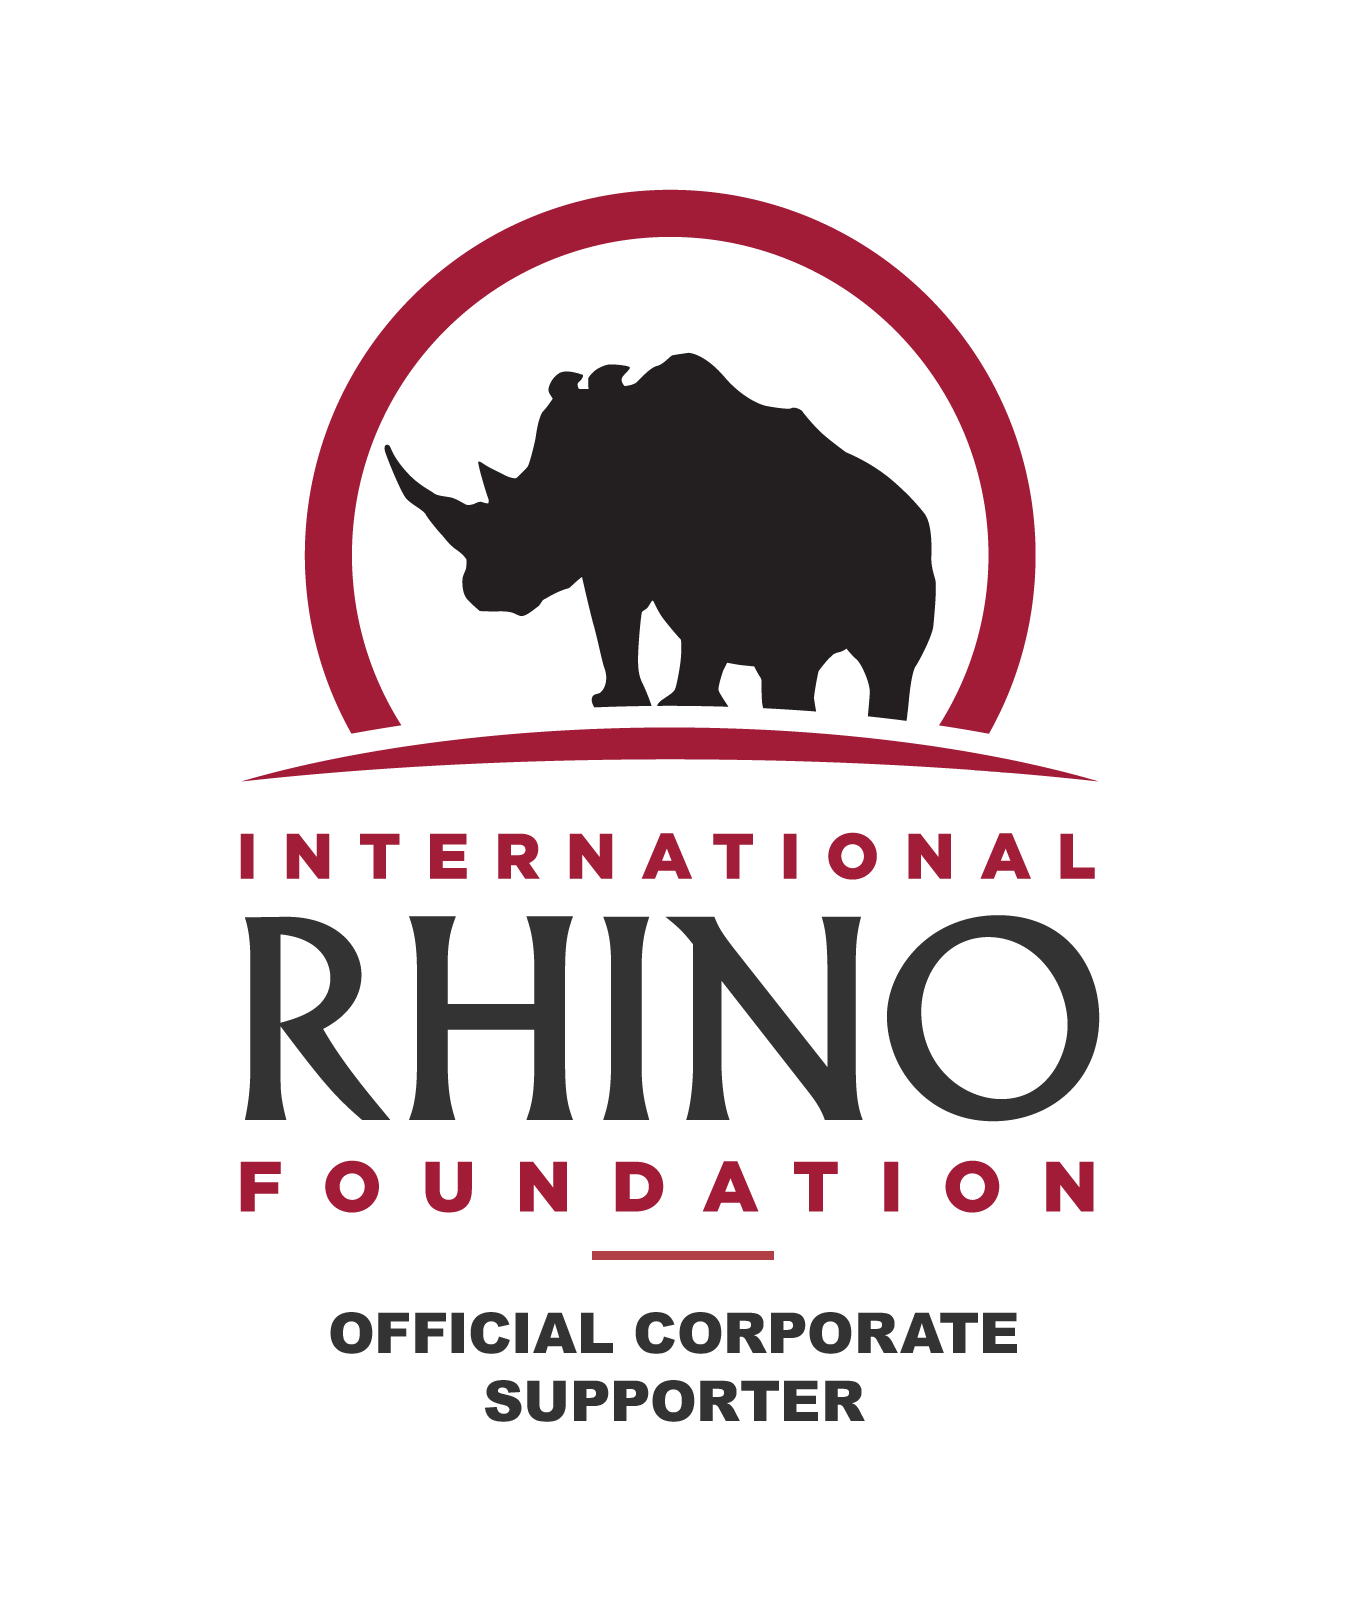 International Rhino Foundation Official Corporate Supporter badge. It features the IRF's rhinoceros logo. I'm so proud of this!